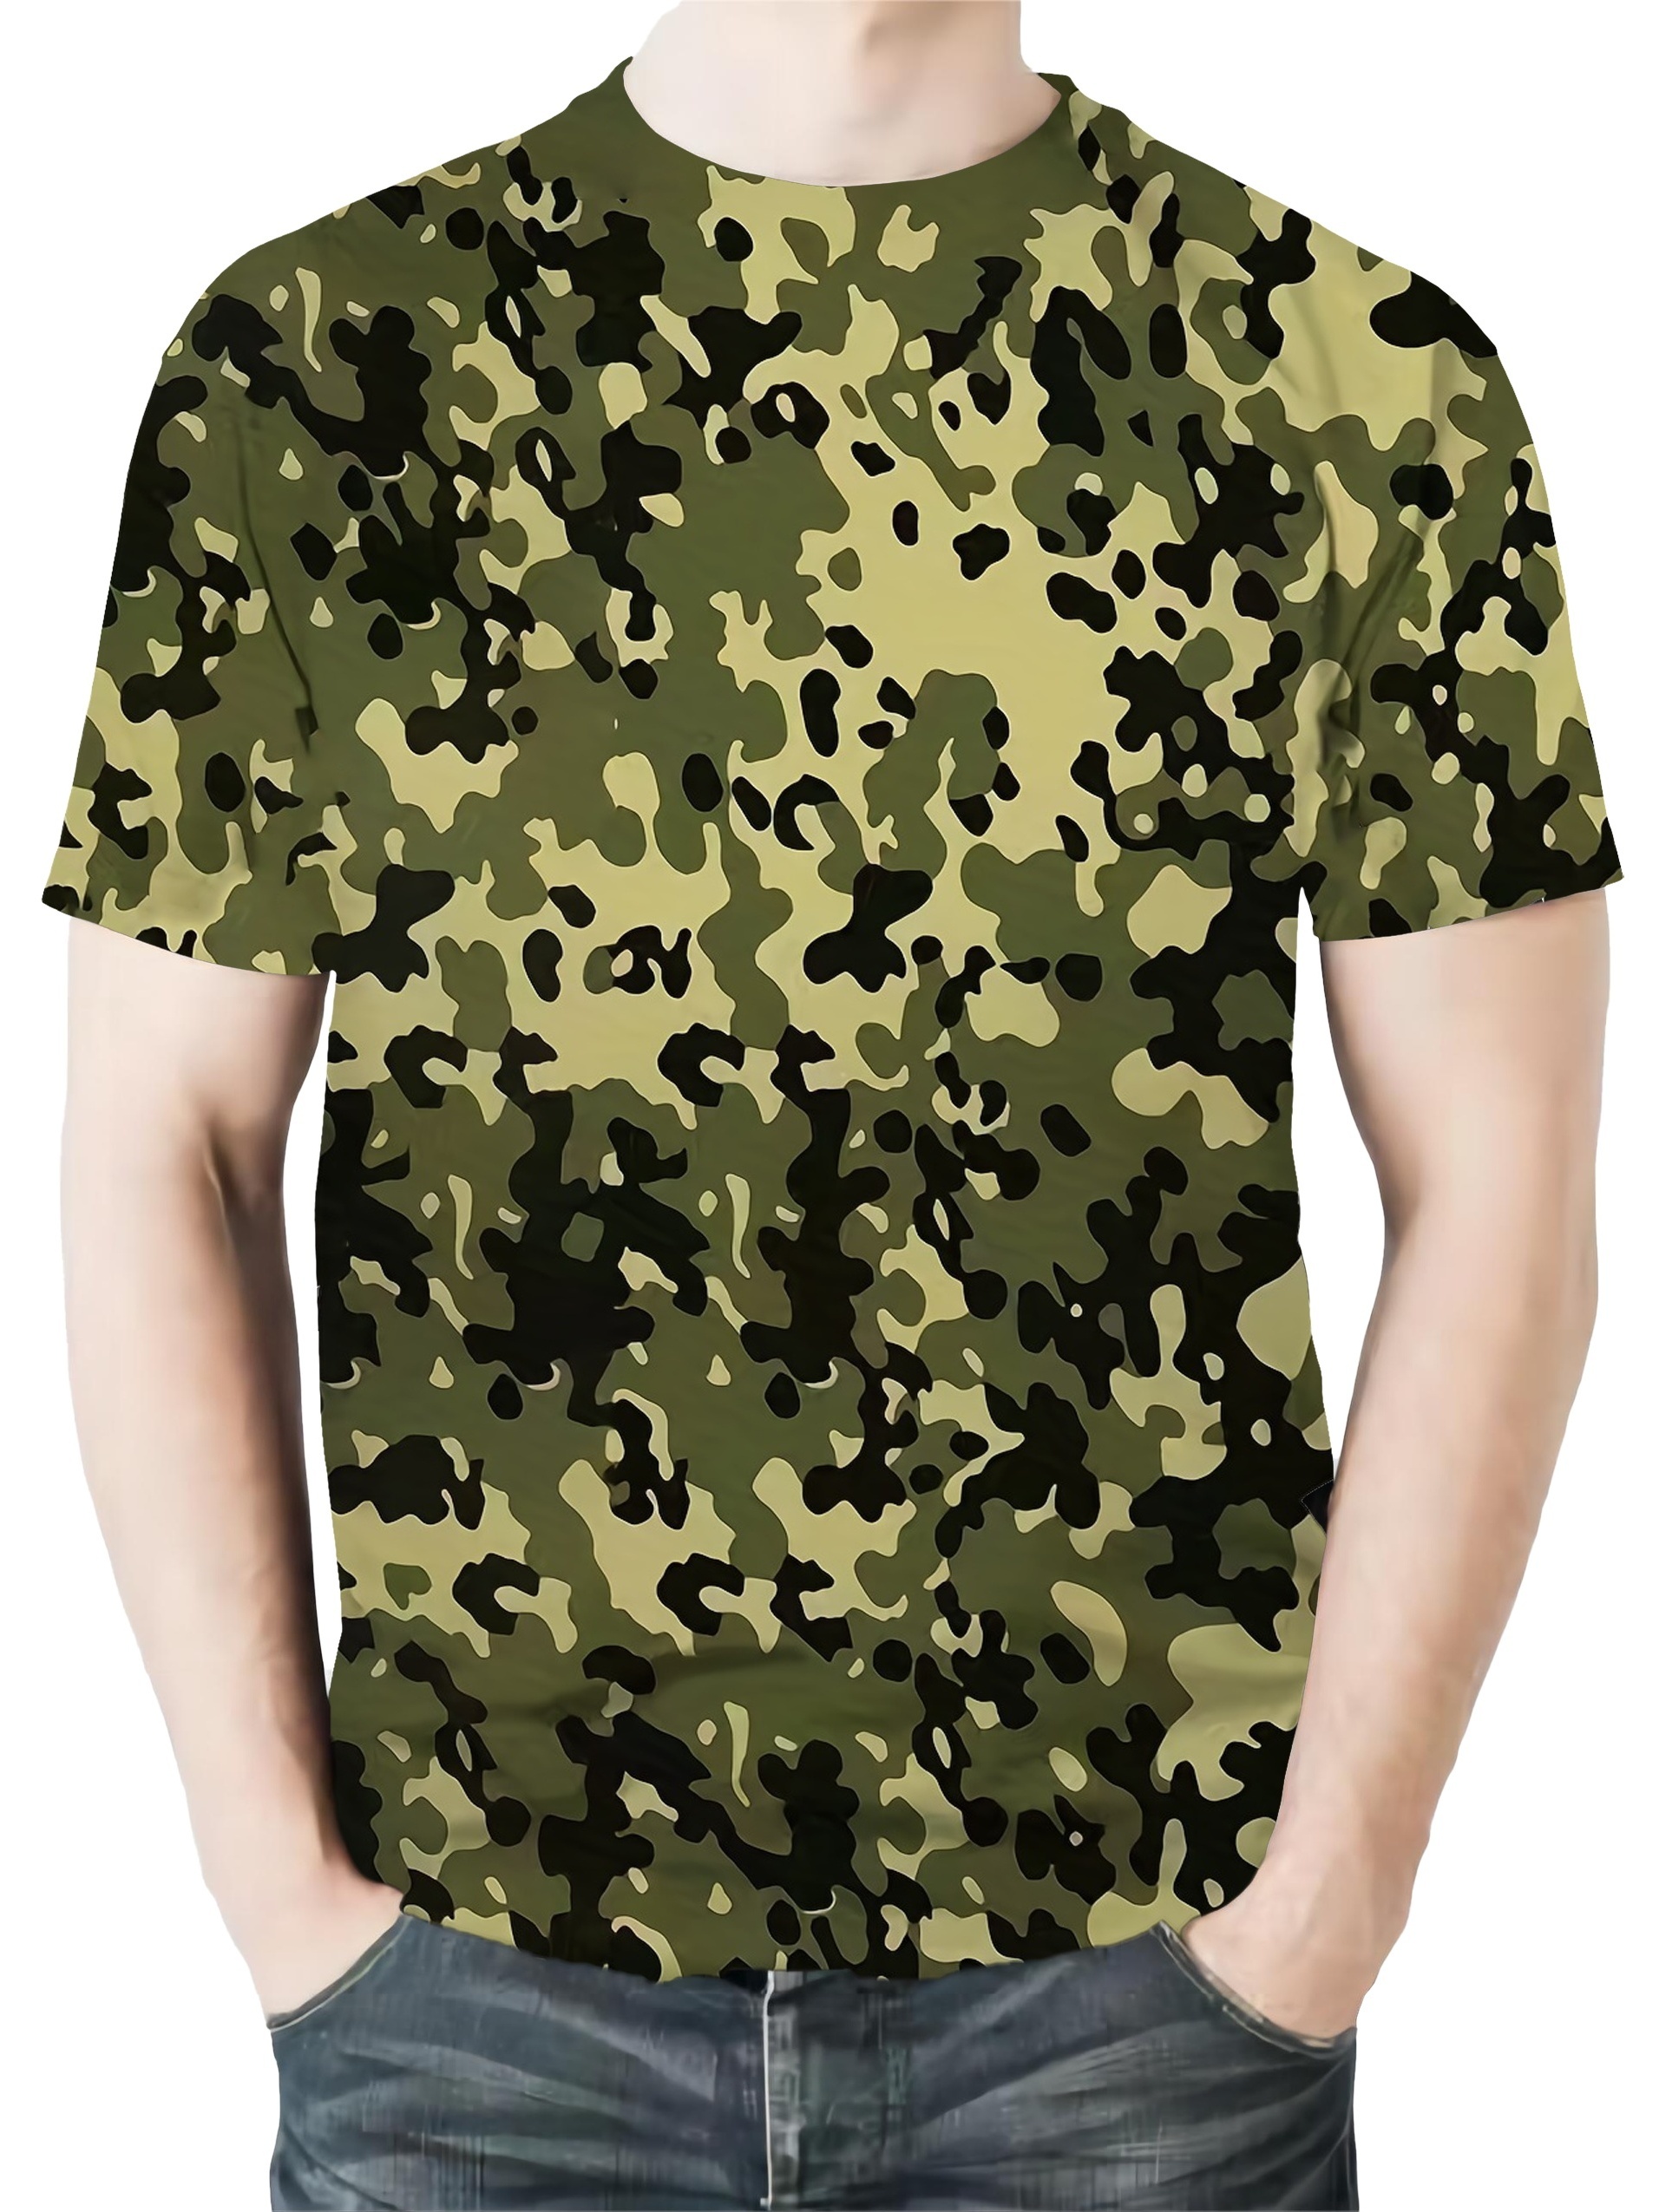 Military Camo Green Short Sleeve Tee Shirt for Hunting and Casual